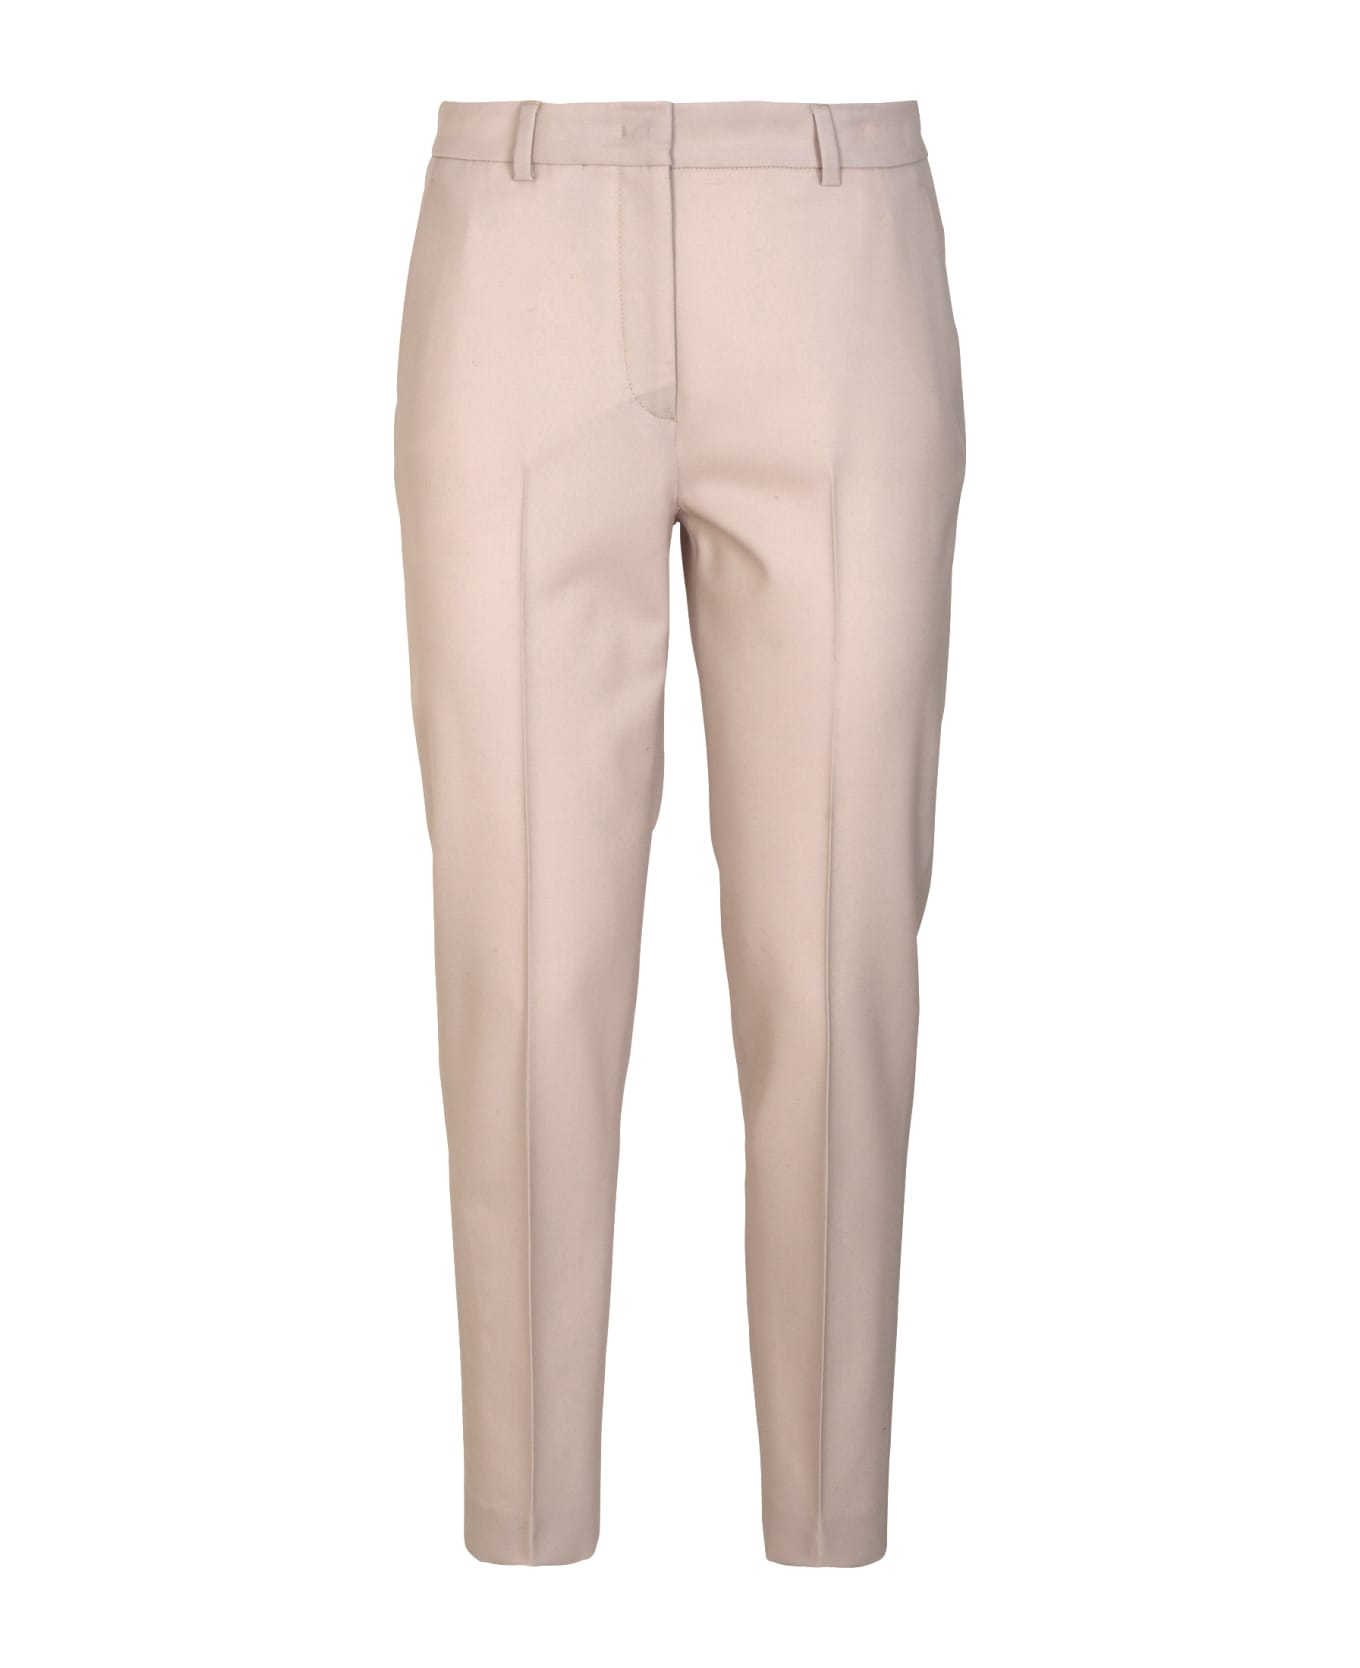 QL2 Concealed Fitted Trousers - Canvas